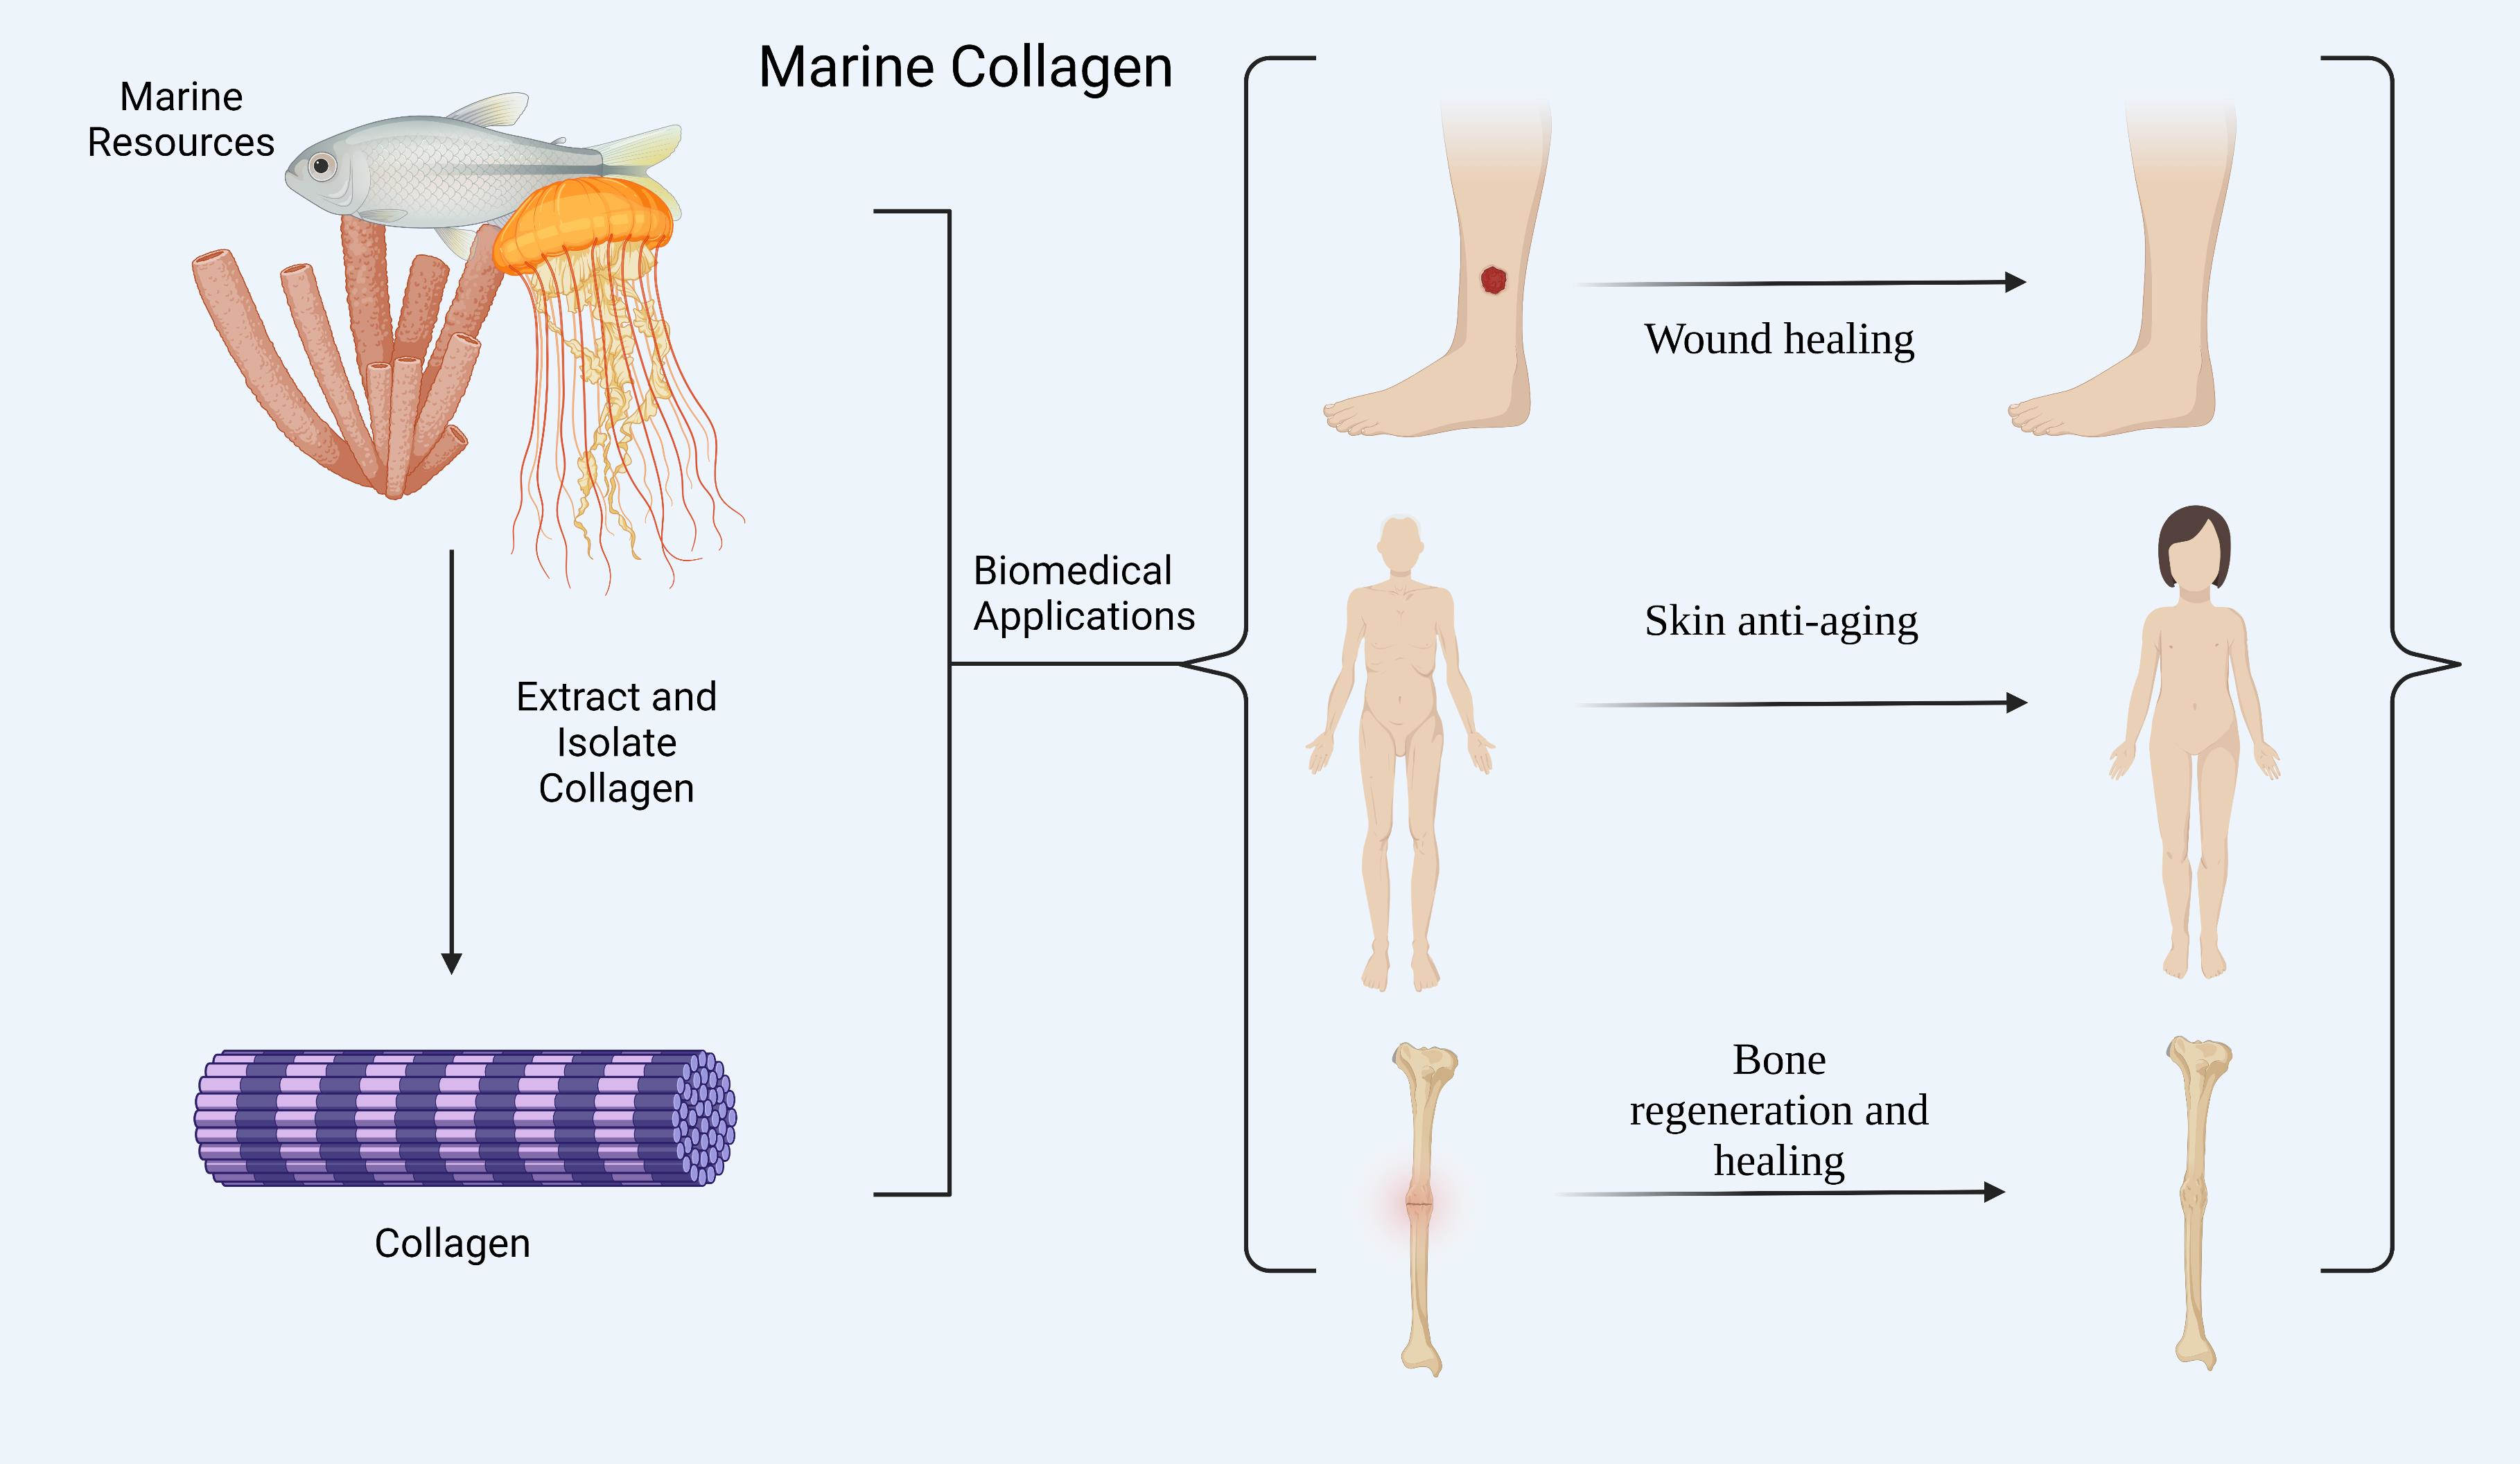 Marine Drugs | Free Full-Text | Marine Collagen: A Promising Biomaterial  for Wound Healing, Skin Anti-Aging, and Bone Regeneration | HTML